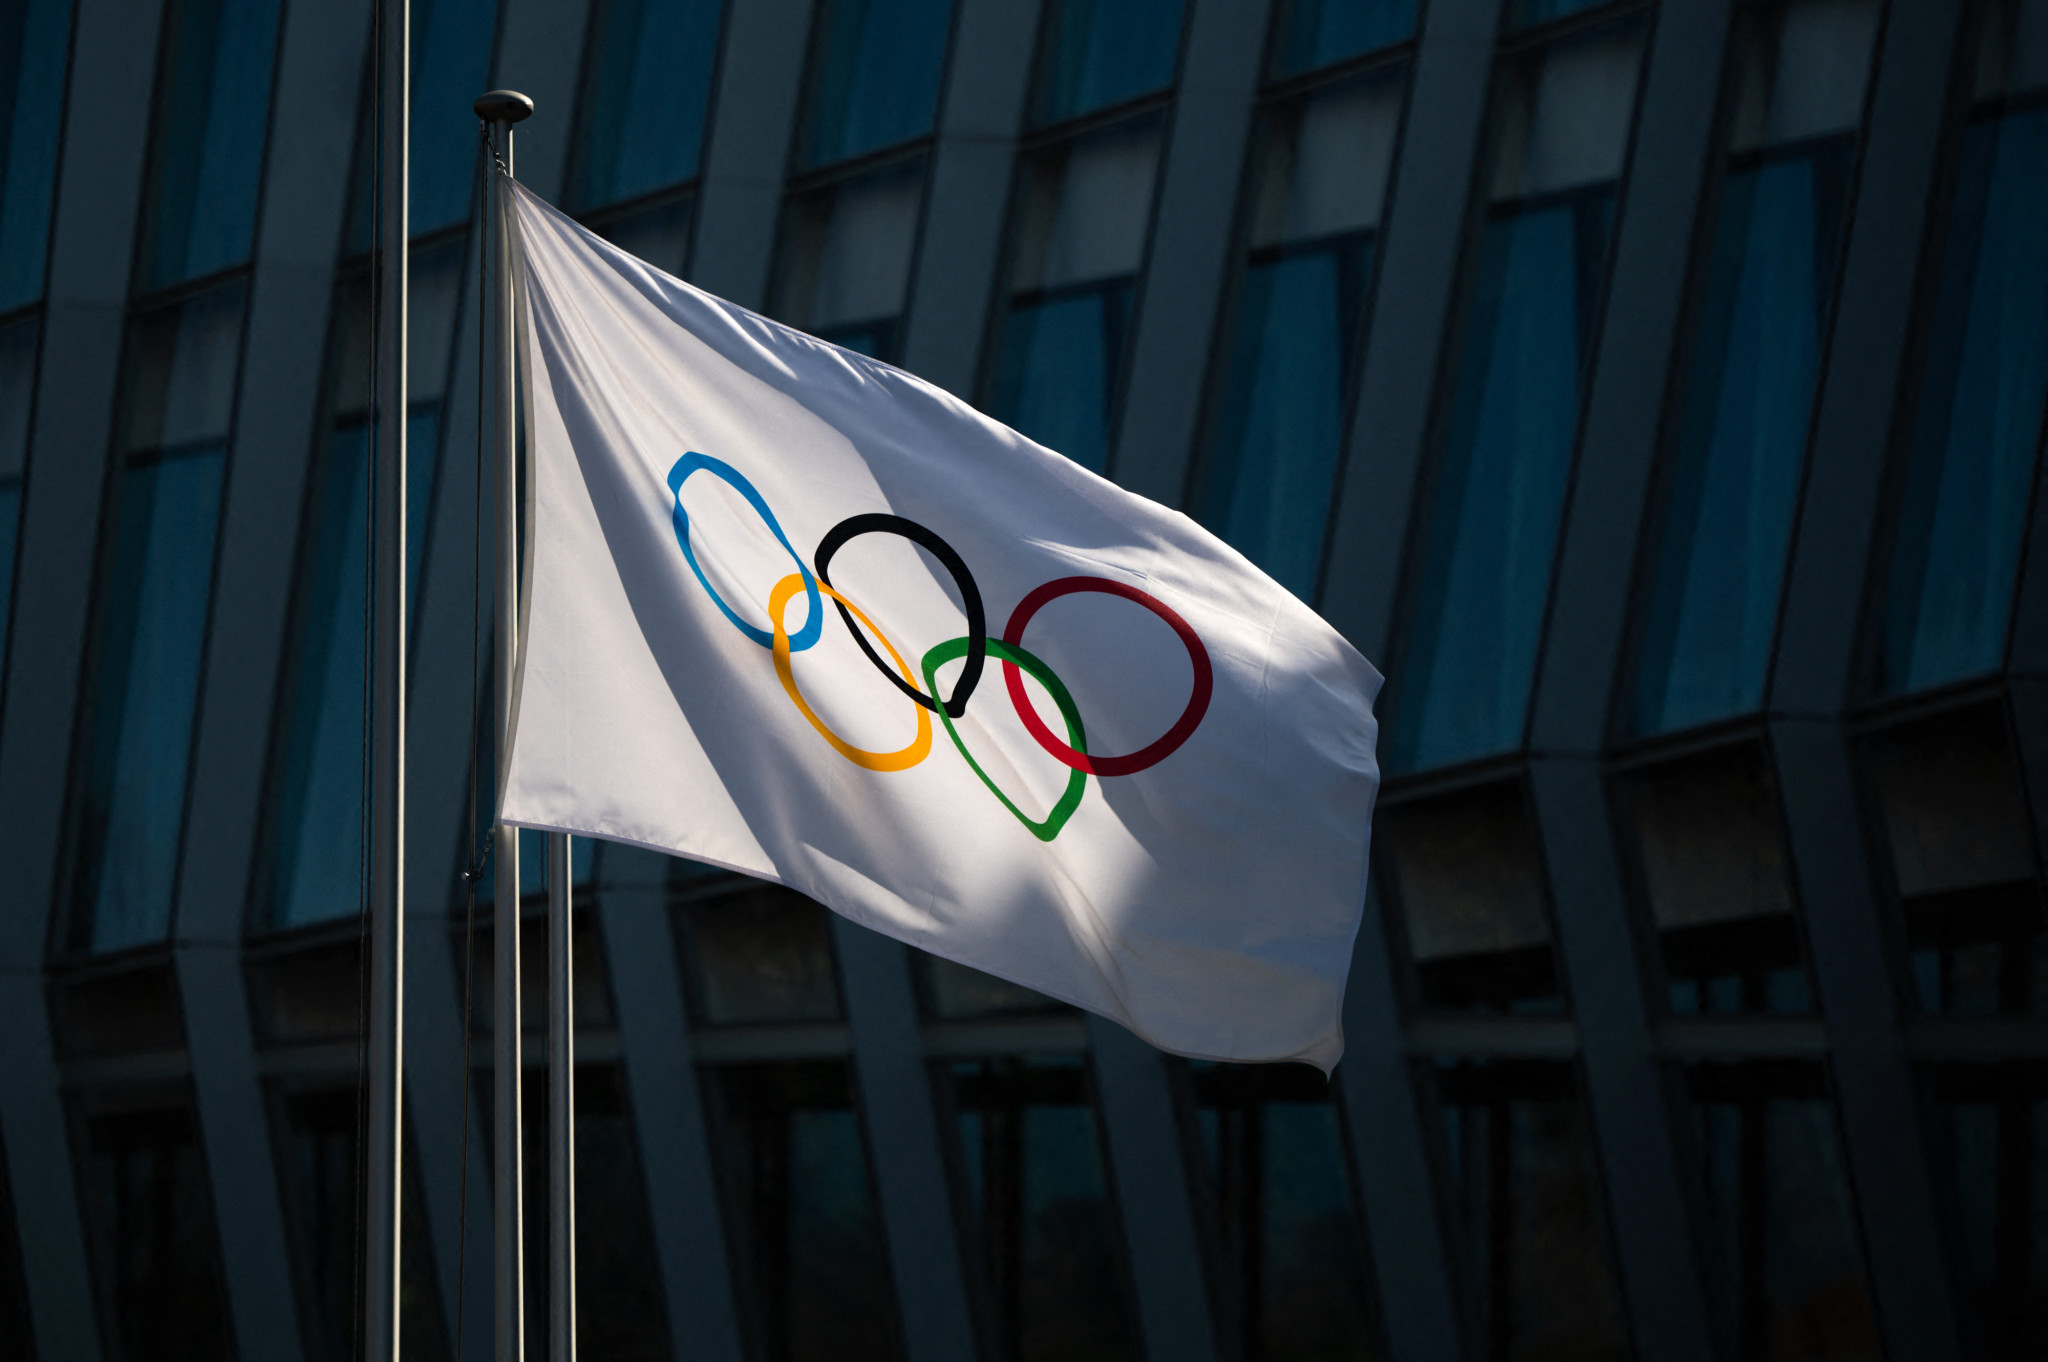 Human Rights Watch has called on the IOC to entrench human rights across all its operations ©Getty Images